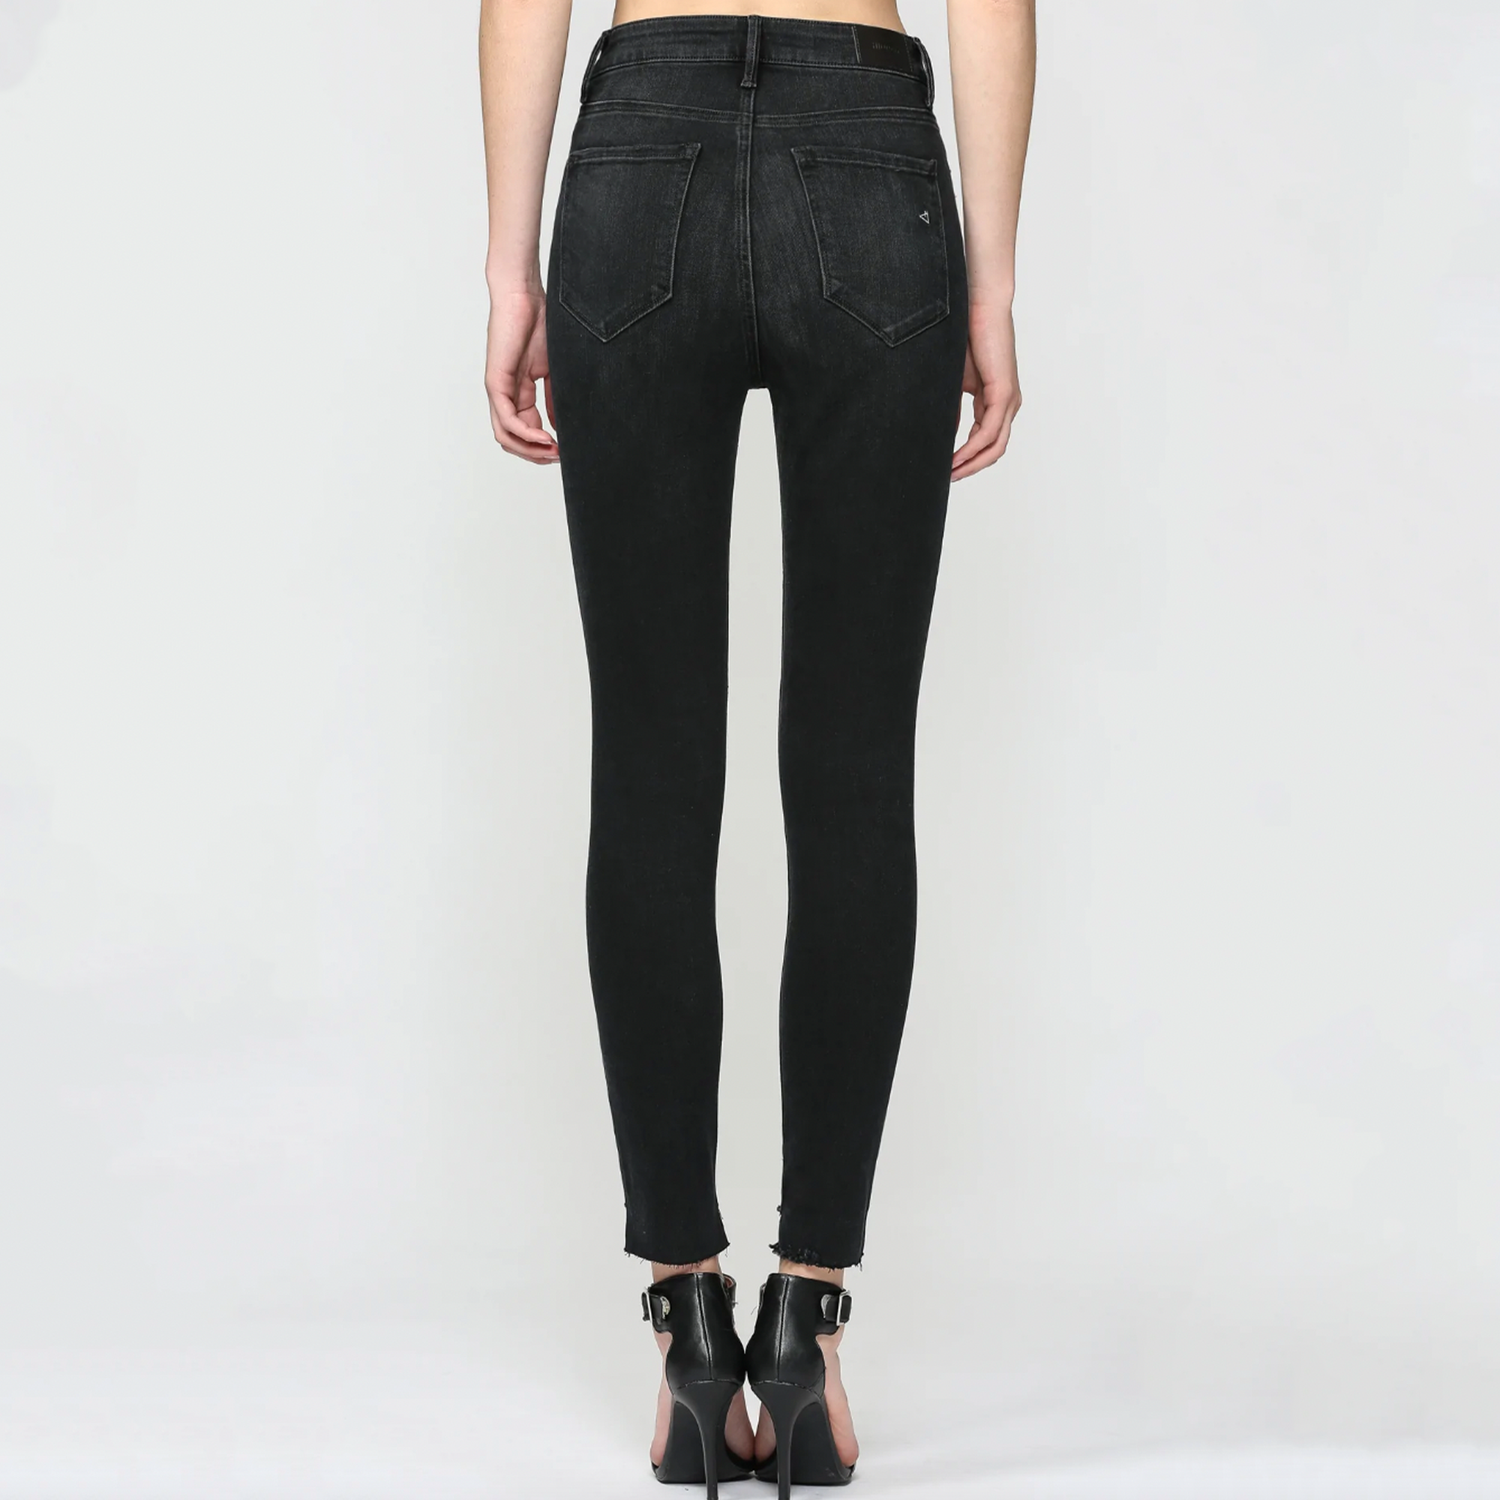 Hidden Taylor High Rise Crop Skinny. Everyone needs a pair of black wash high rise jeans. An addd bonus is the slit knee and step notched hem details. Amazing fit denim with an edgy feel